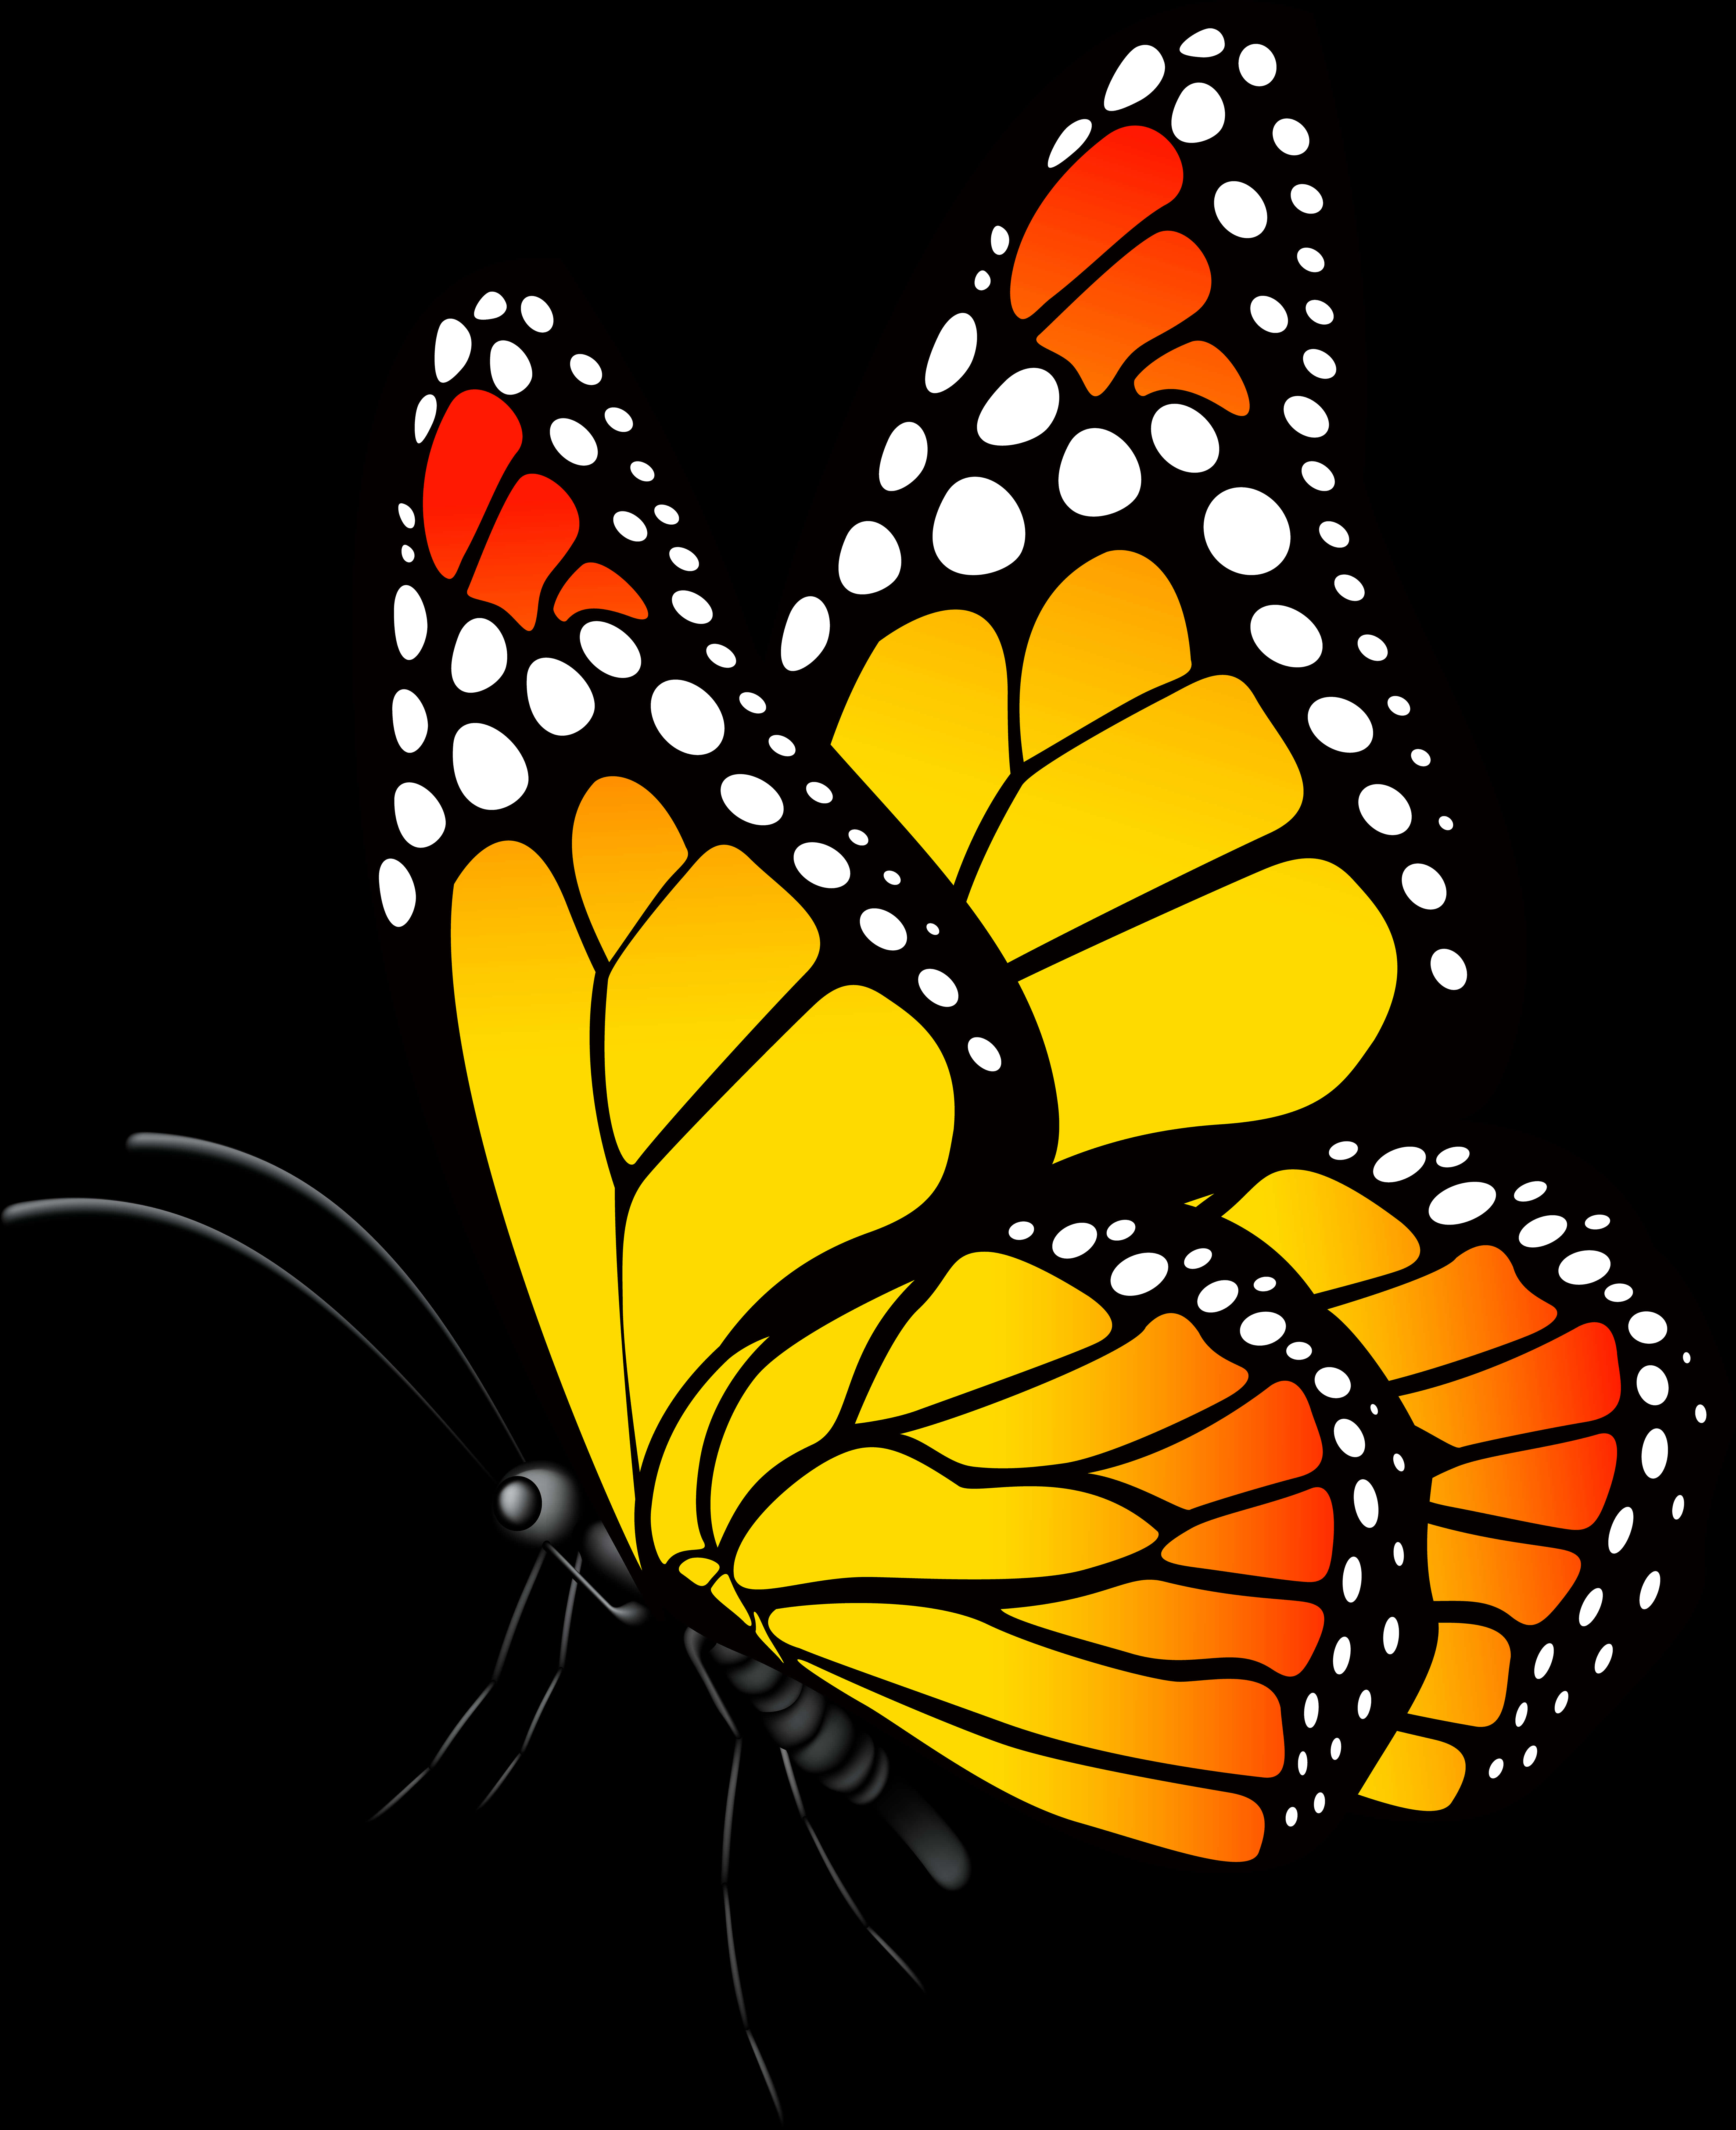 Vibrant Monarch Butterfly Illustration PNG image